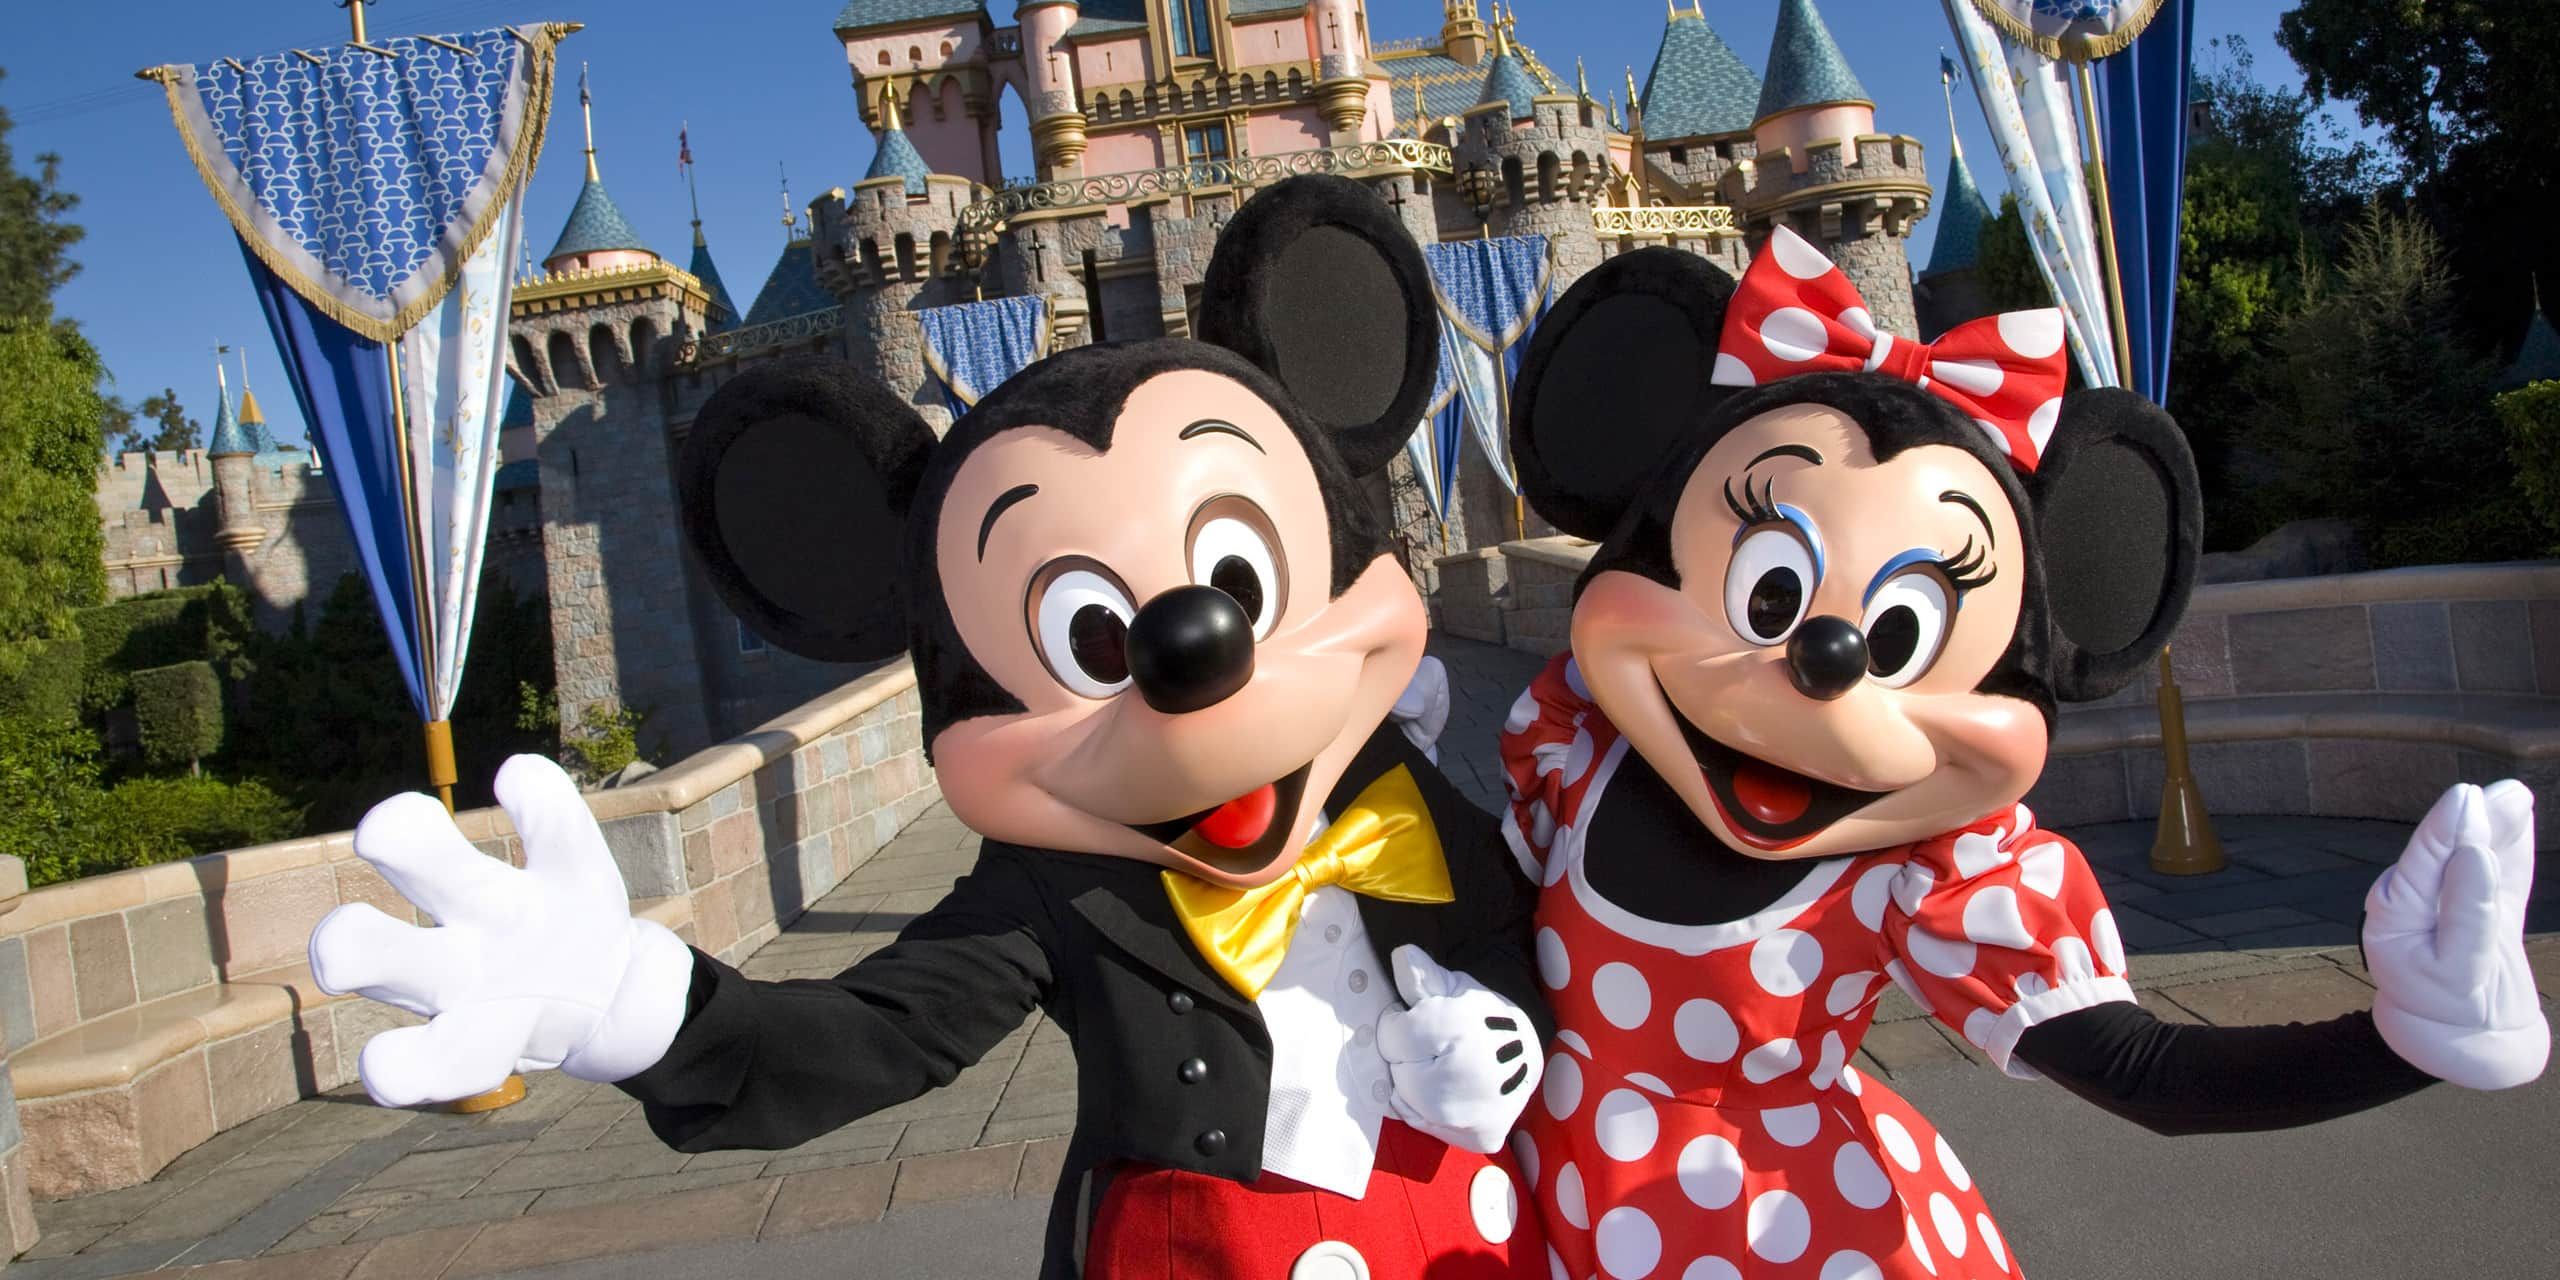 Mickey and Minnie Mouse in front of castle